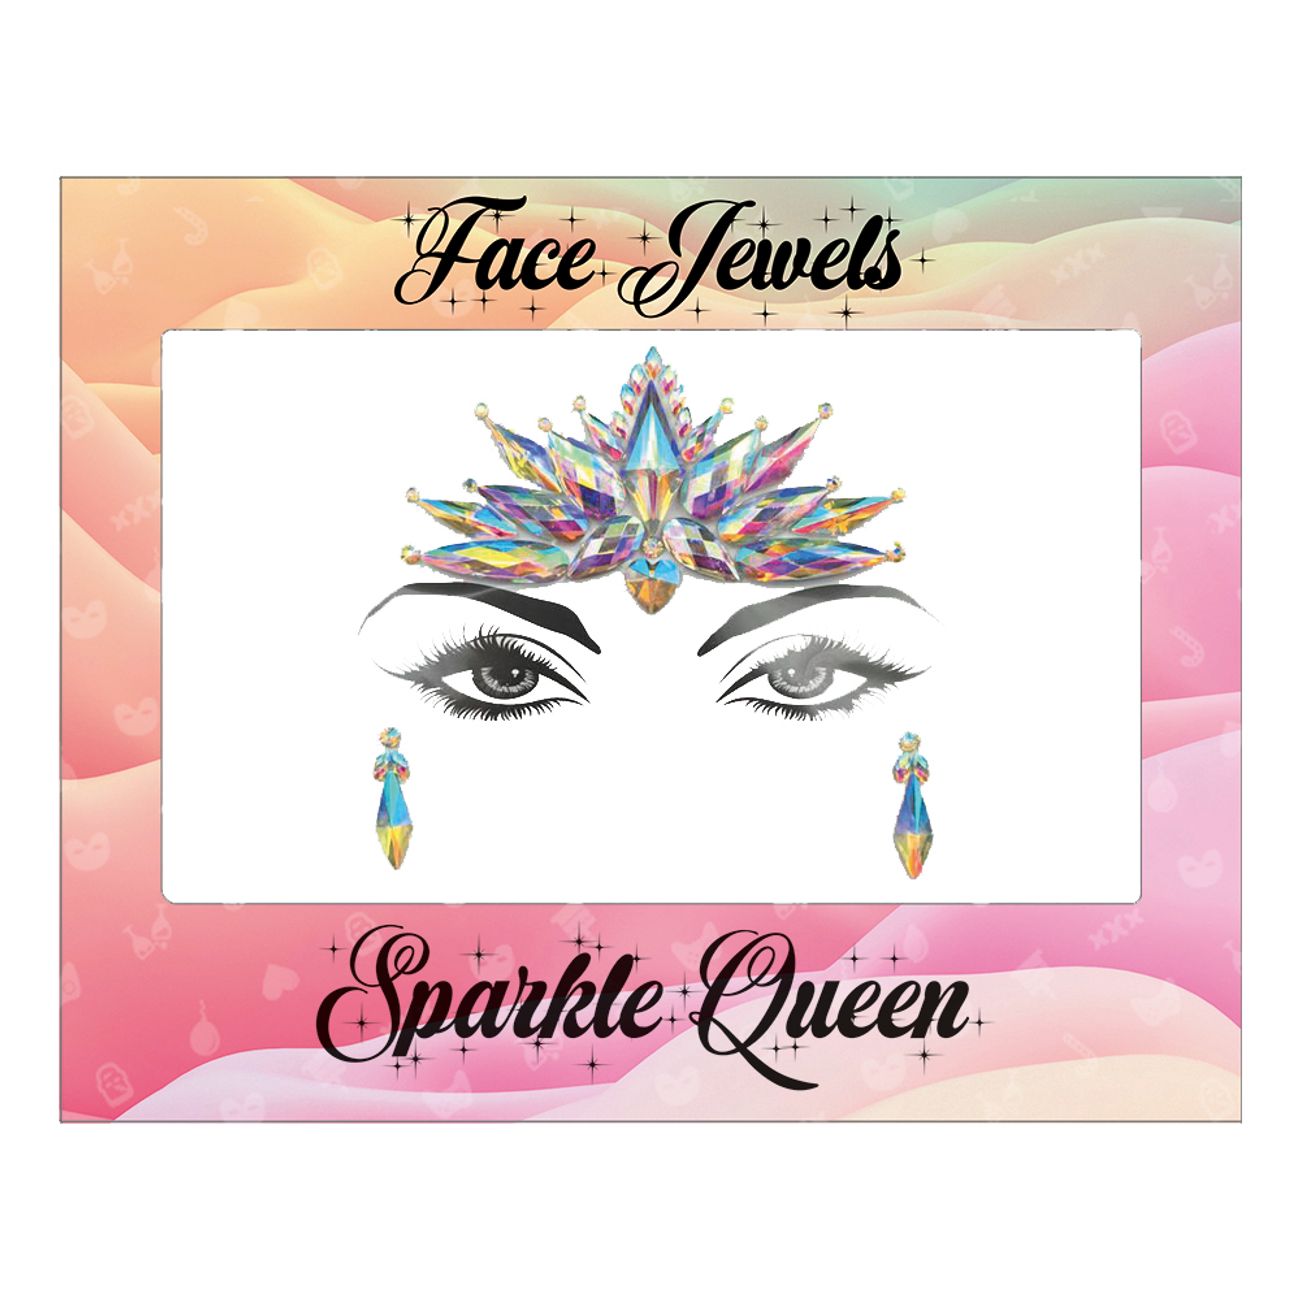 face-jewels-82814-1